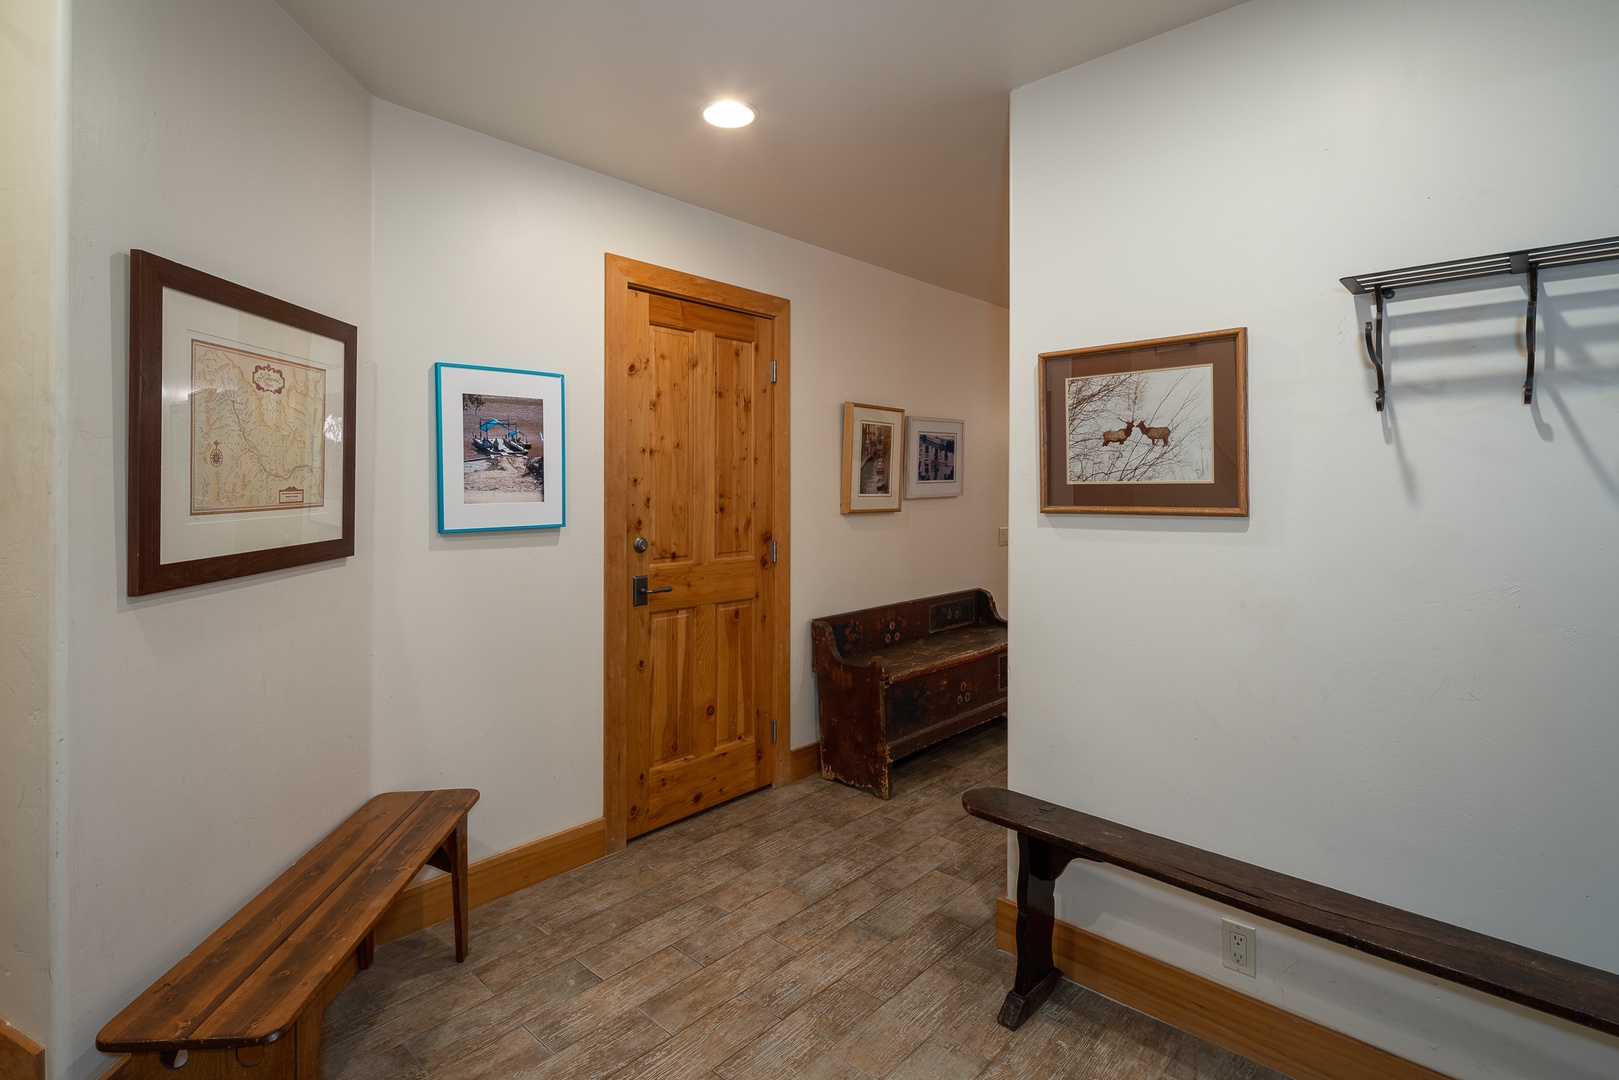 Ketchum Vacation Rentals, Bridgepoint Charm - Just up the stairs, you'll find the three guest bedrooms